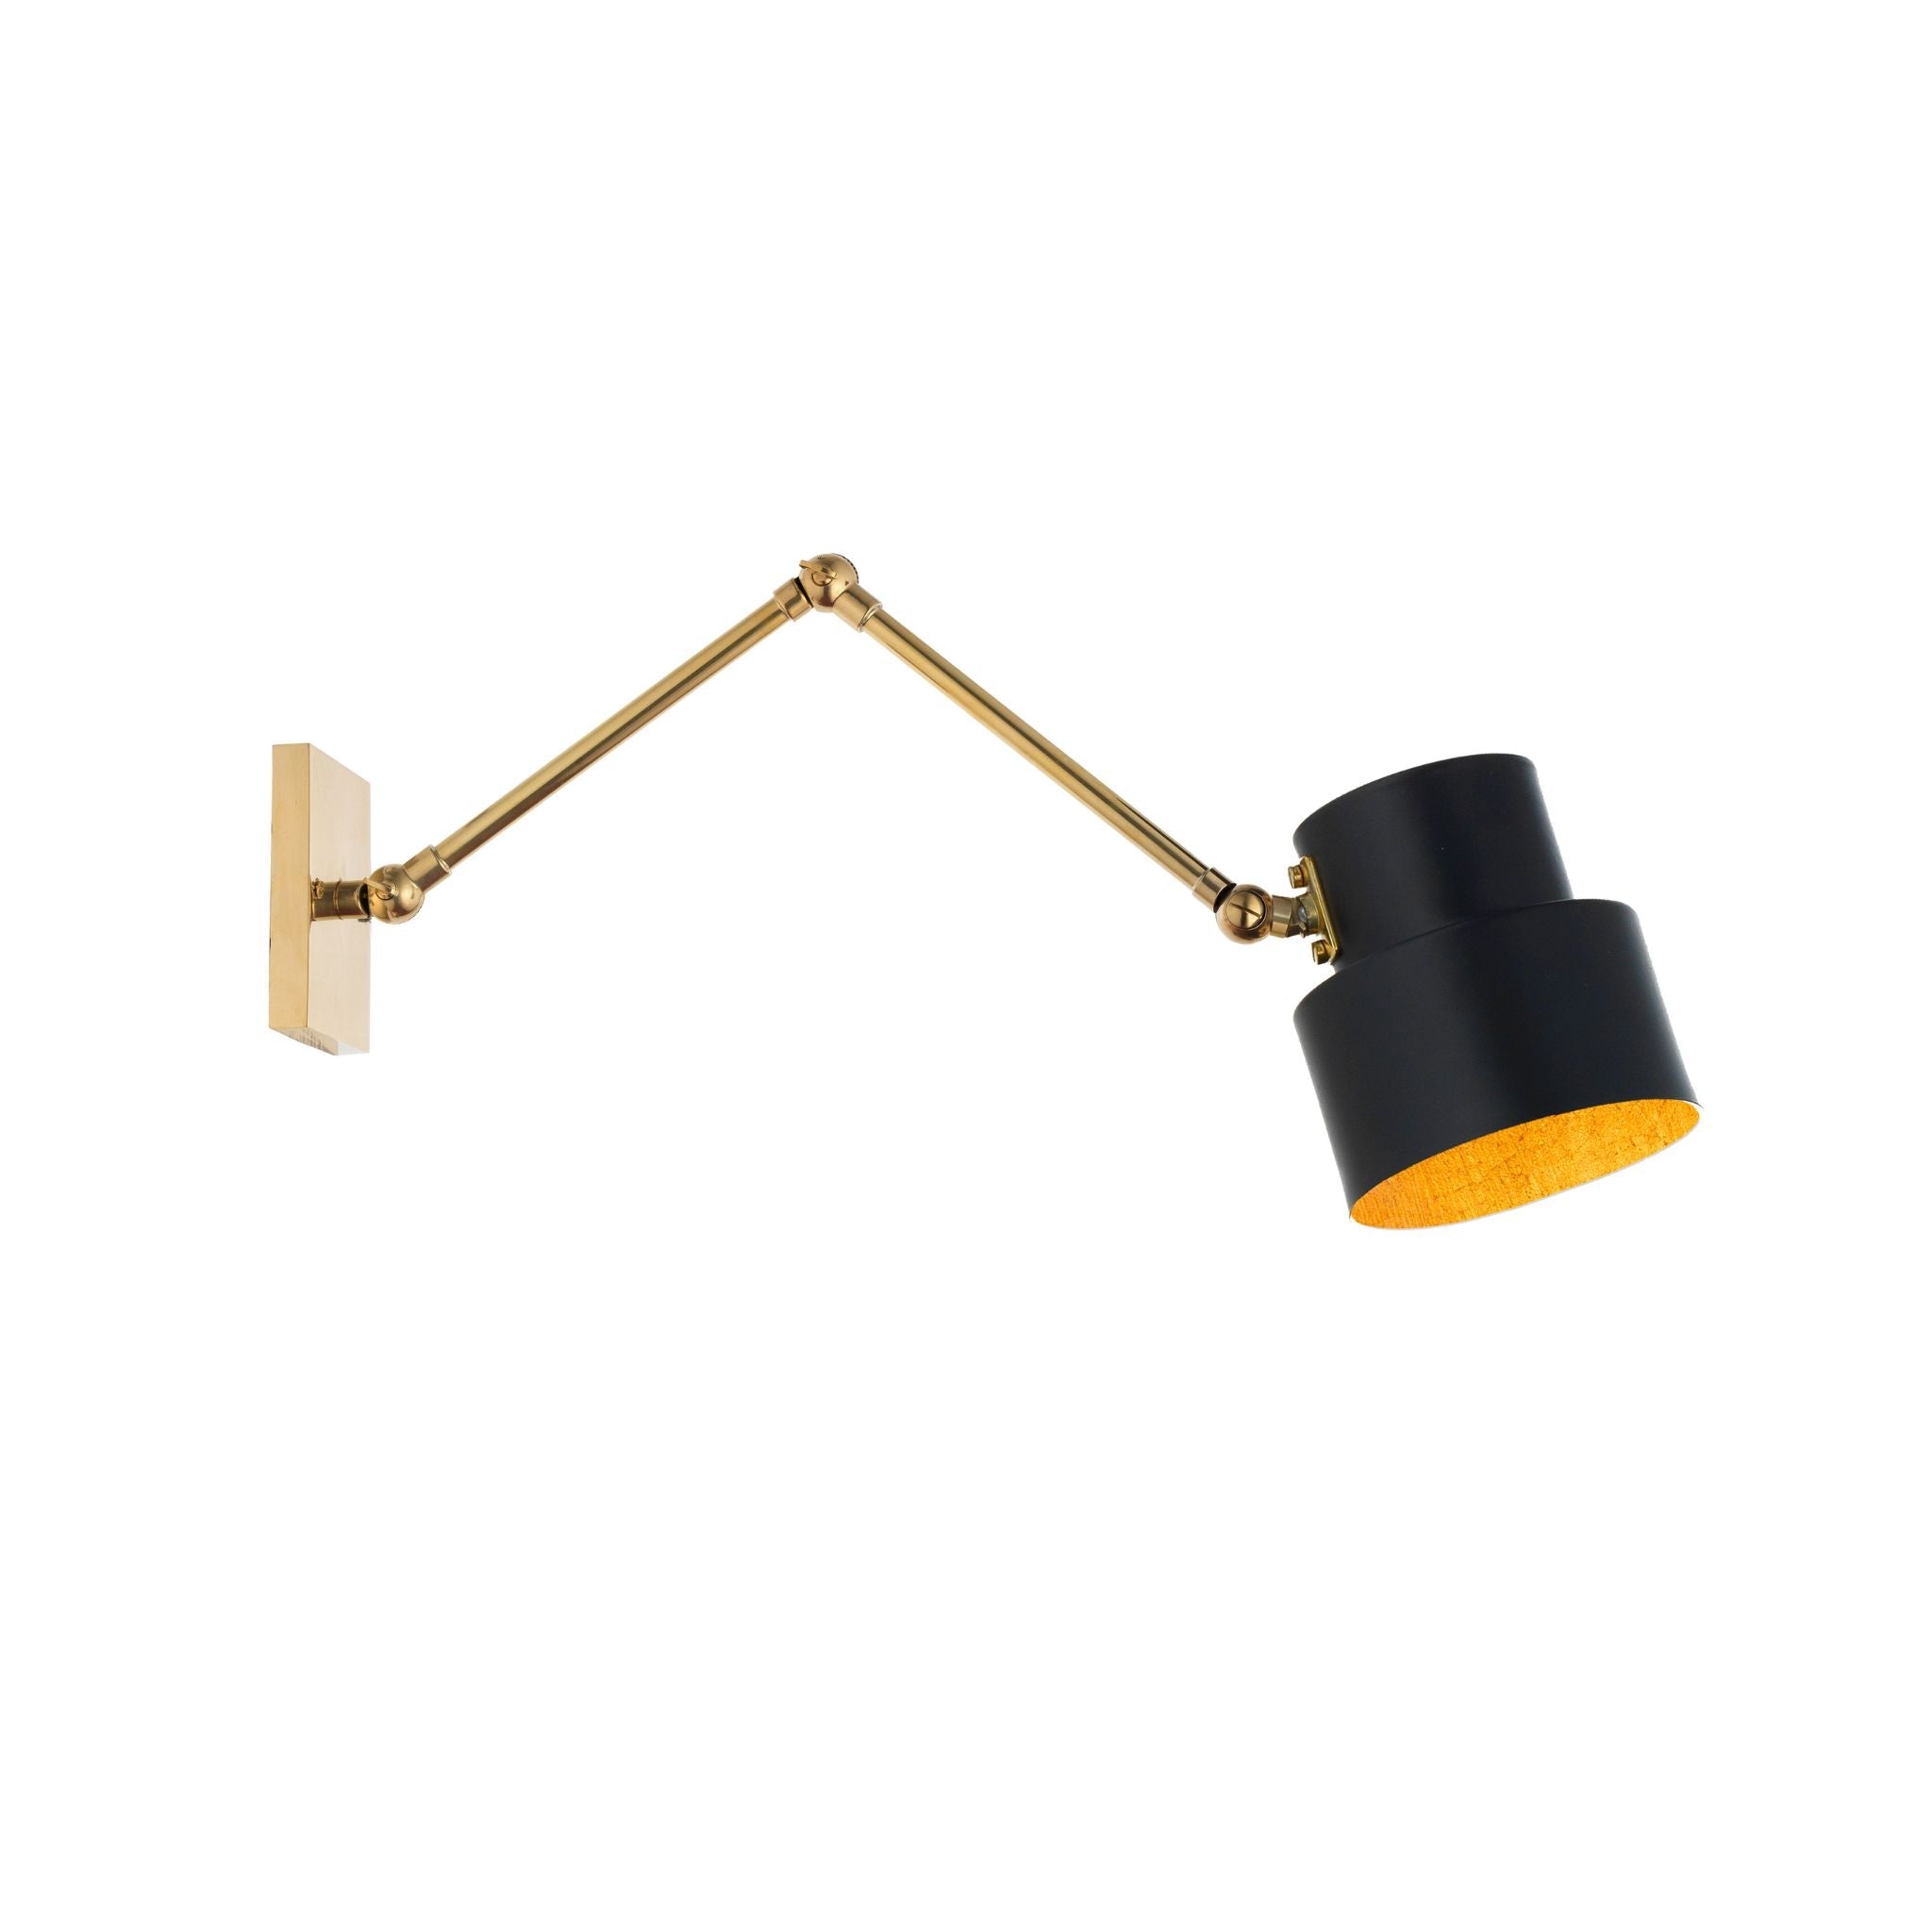 Satellite jet black brass wall light and jointed arm - ilbronzetto